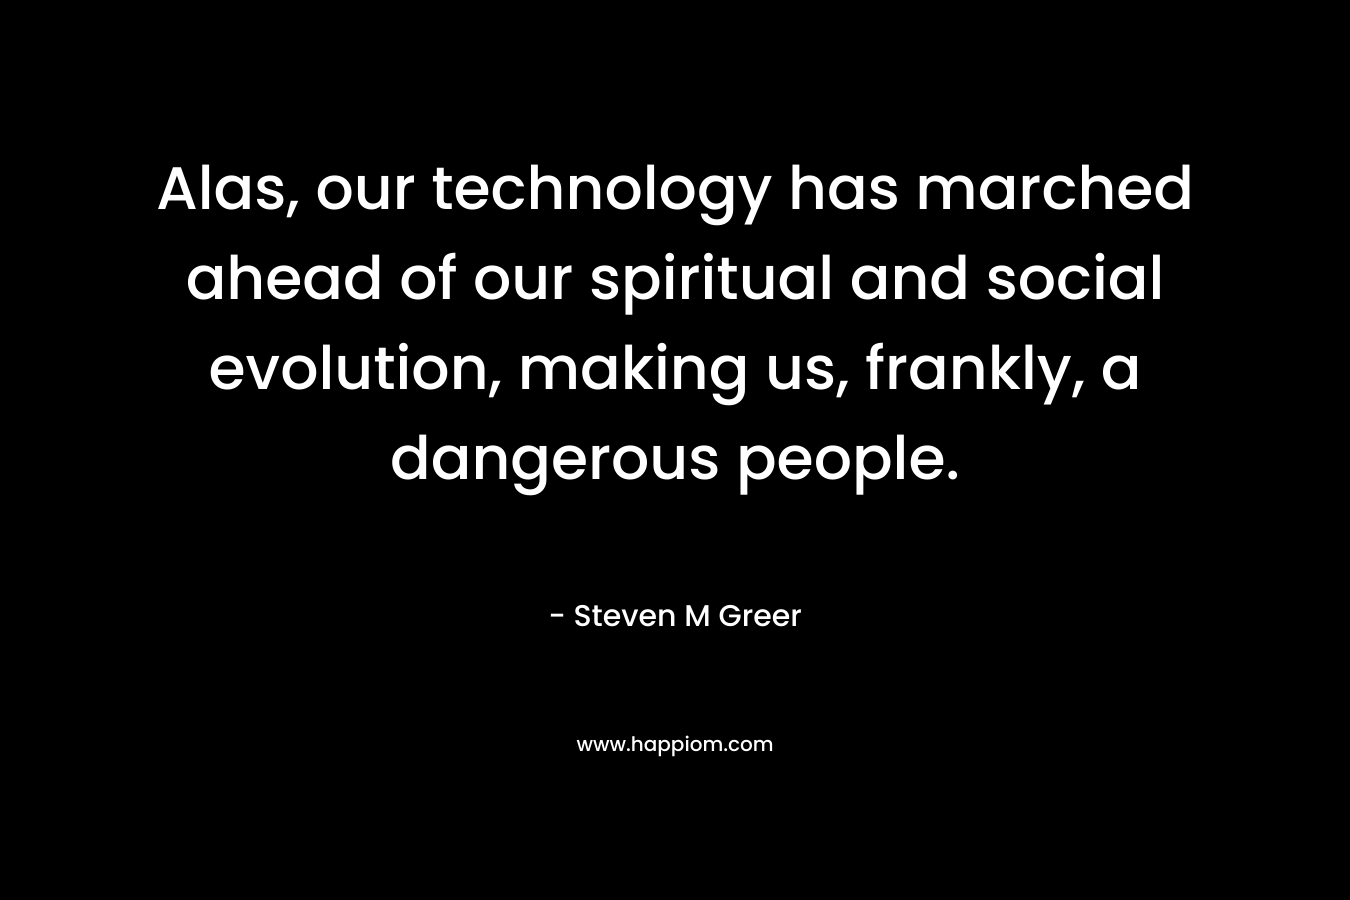 Alas, our technology has marched ahead of our spiritual and social evolution, making us, frankly, a dangerous people. – Steven M Greer